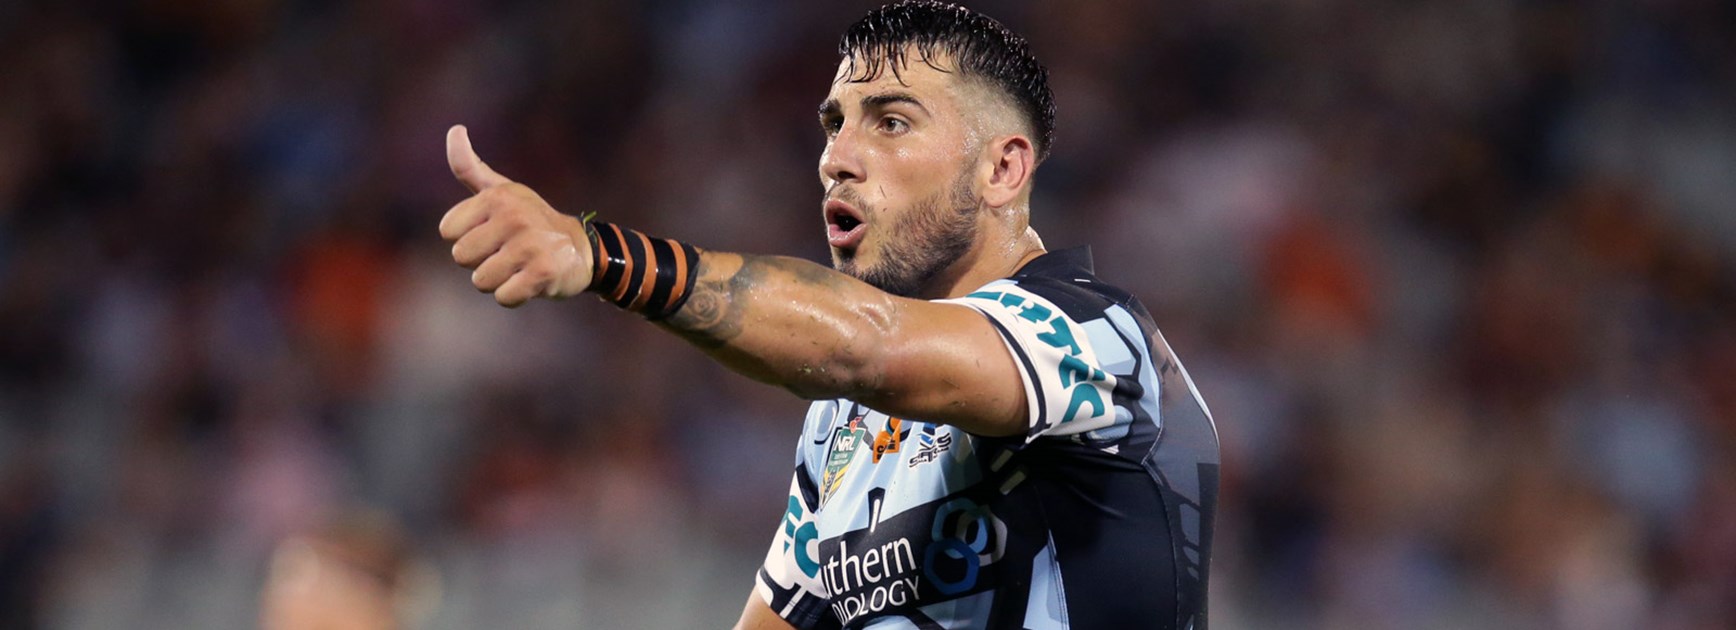 Jack Bird spent time at fullback in Cronulla's trial draw with Wests Tigers.